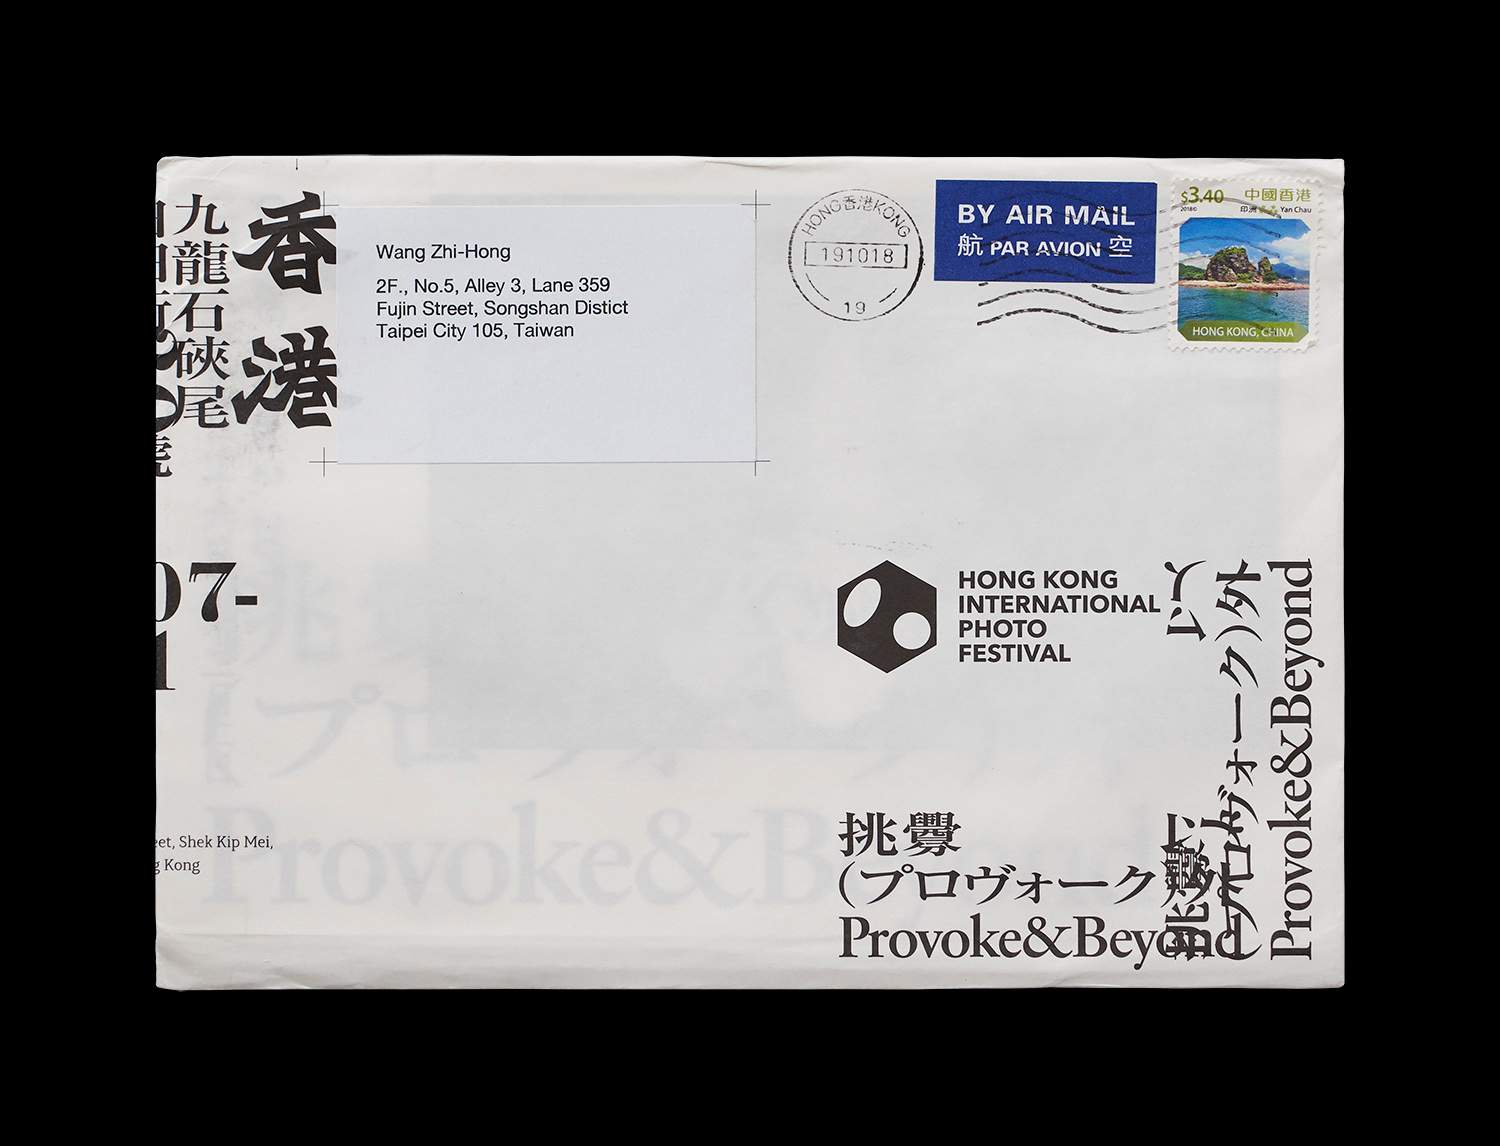 Letter with stamps; Provoke & Beyond, HK Int Photo Festival